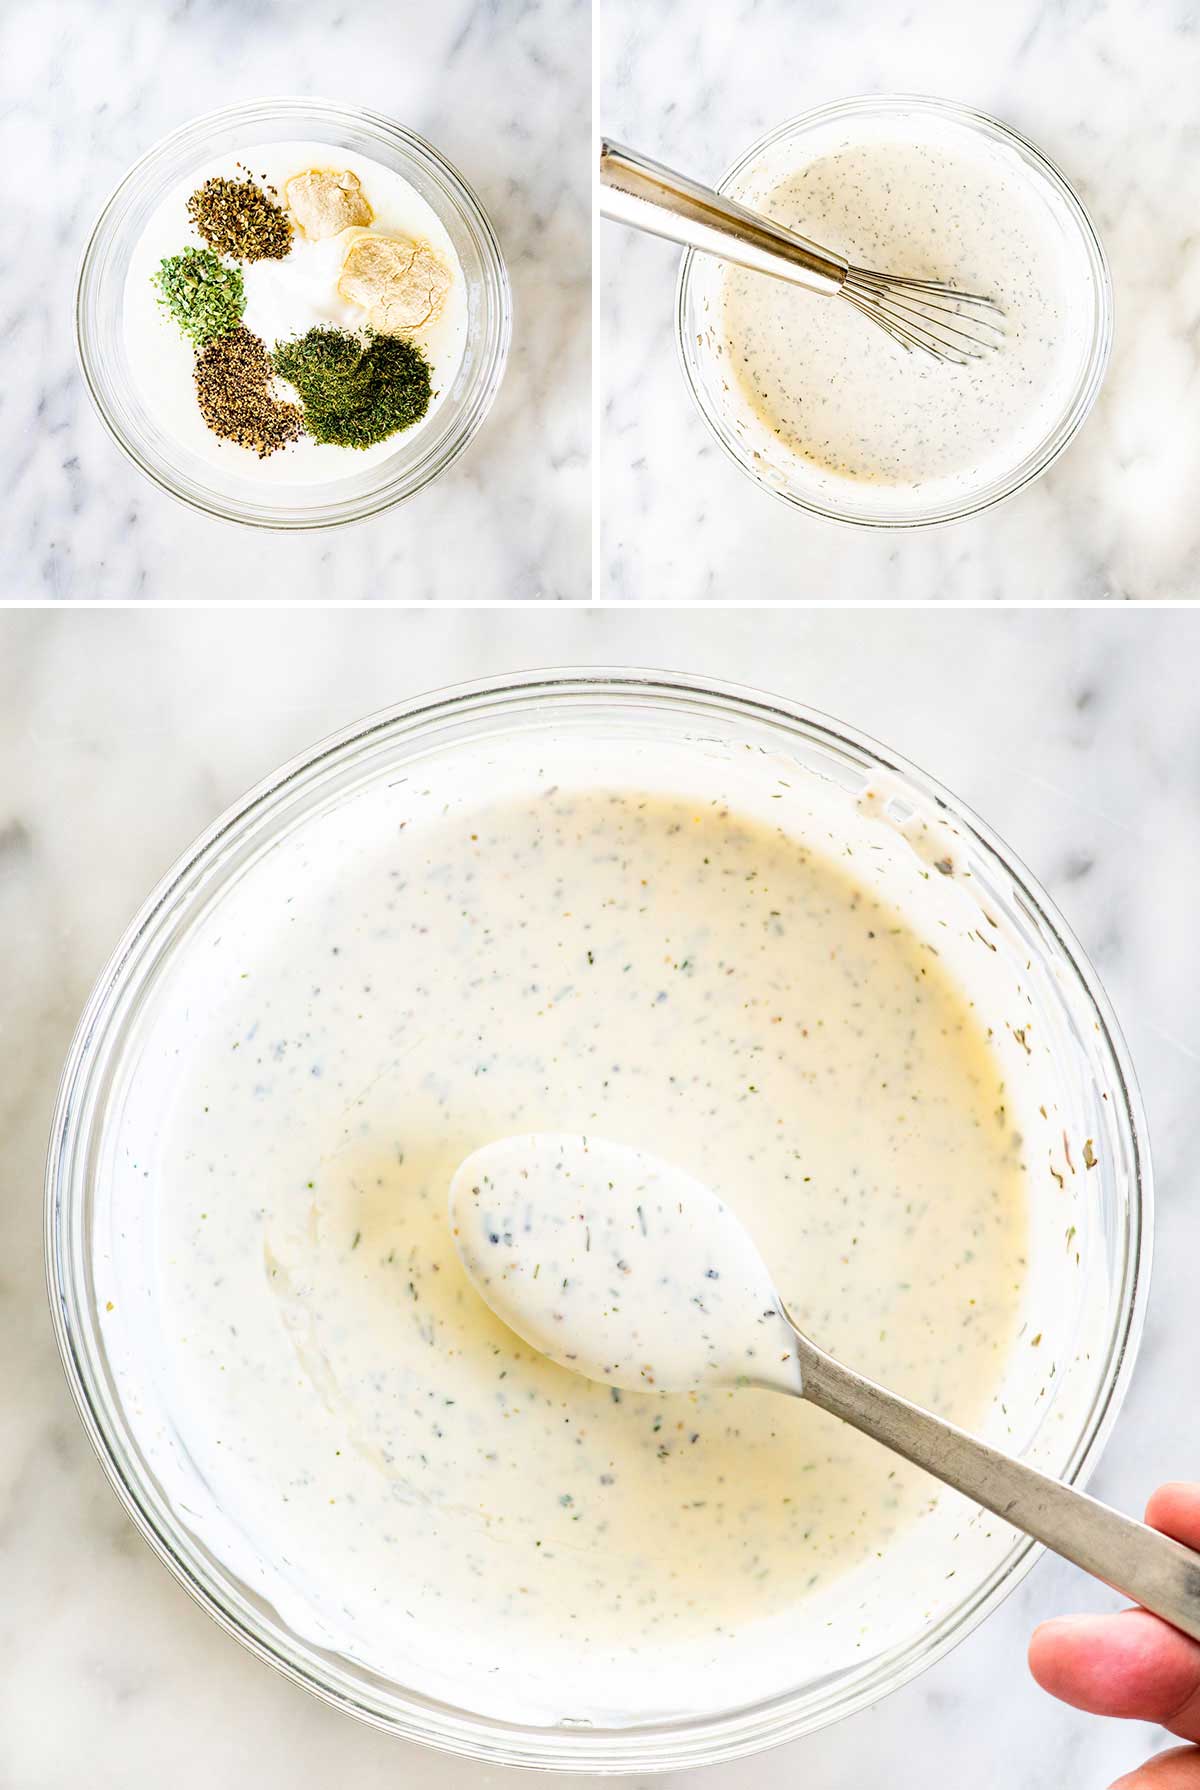 process shots showing how to make ranch dressing at home